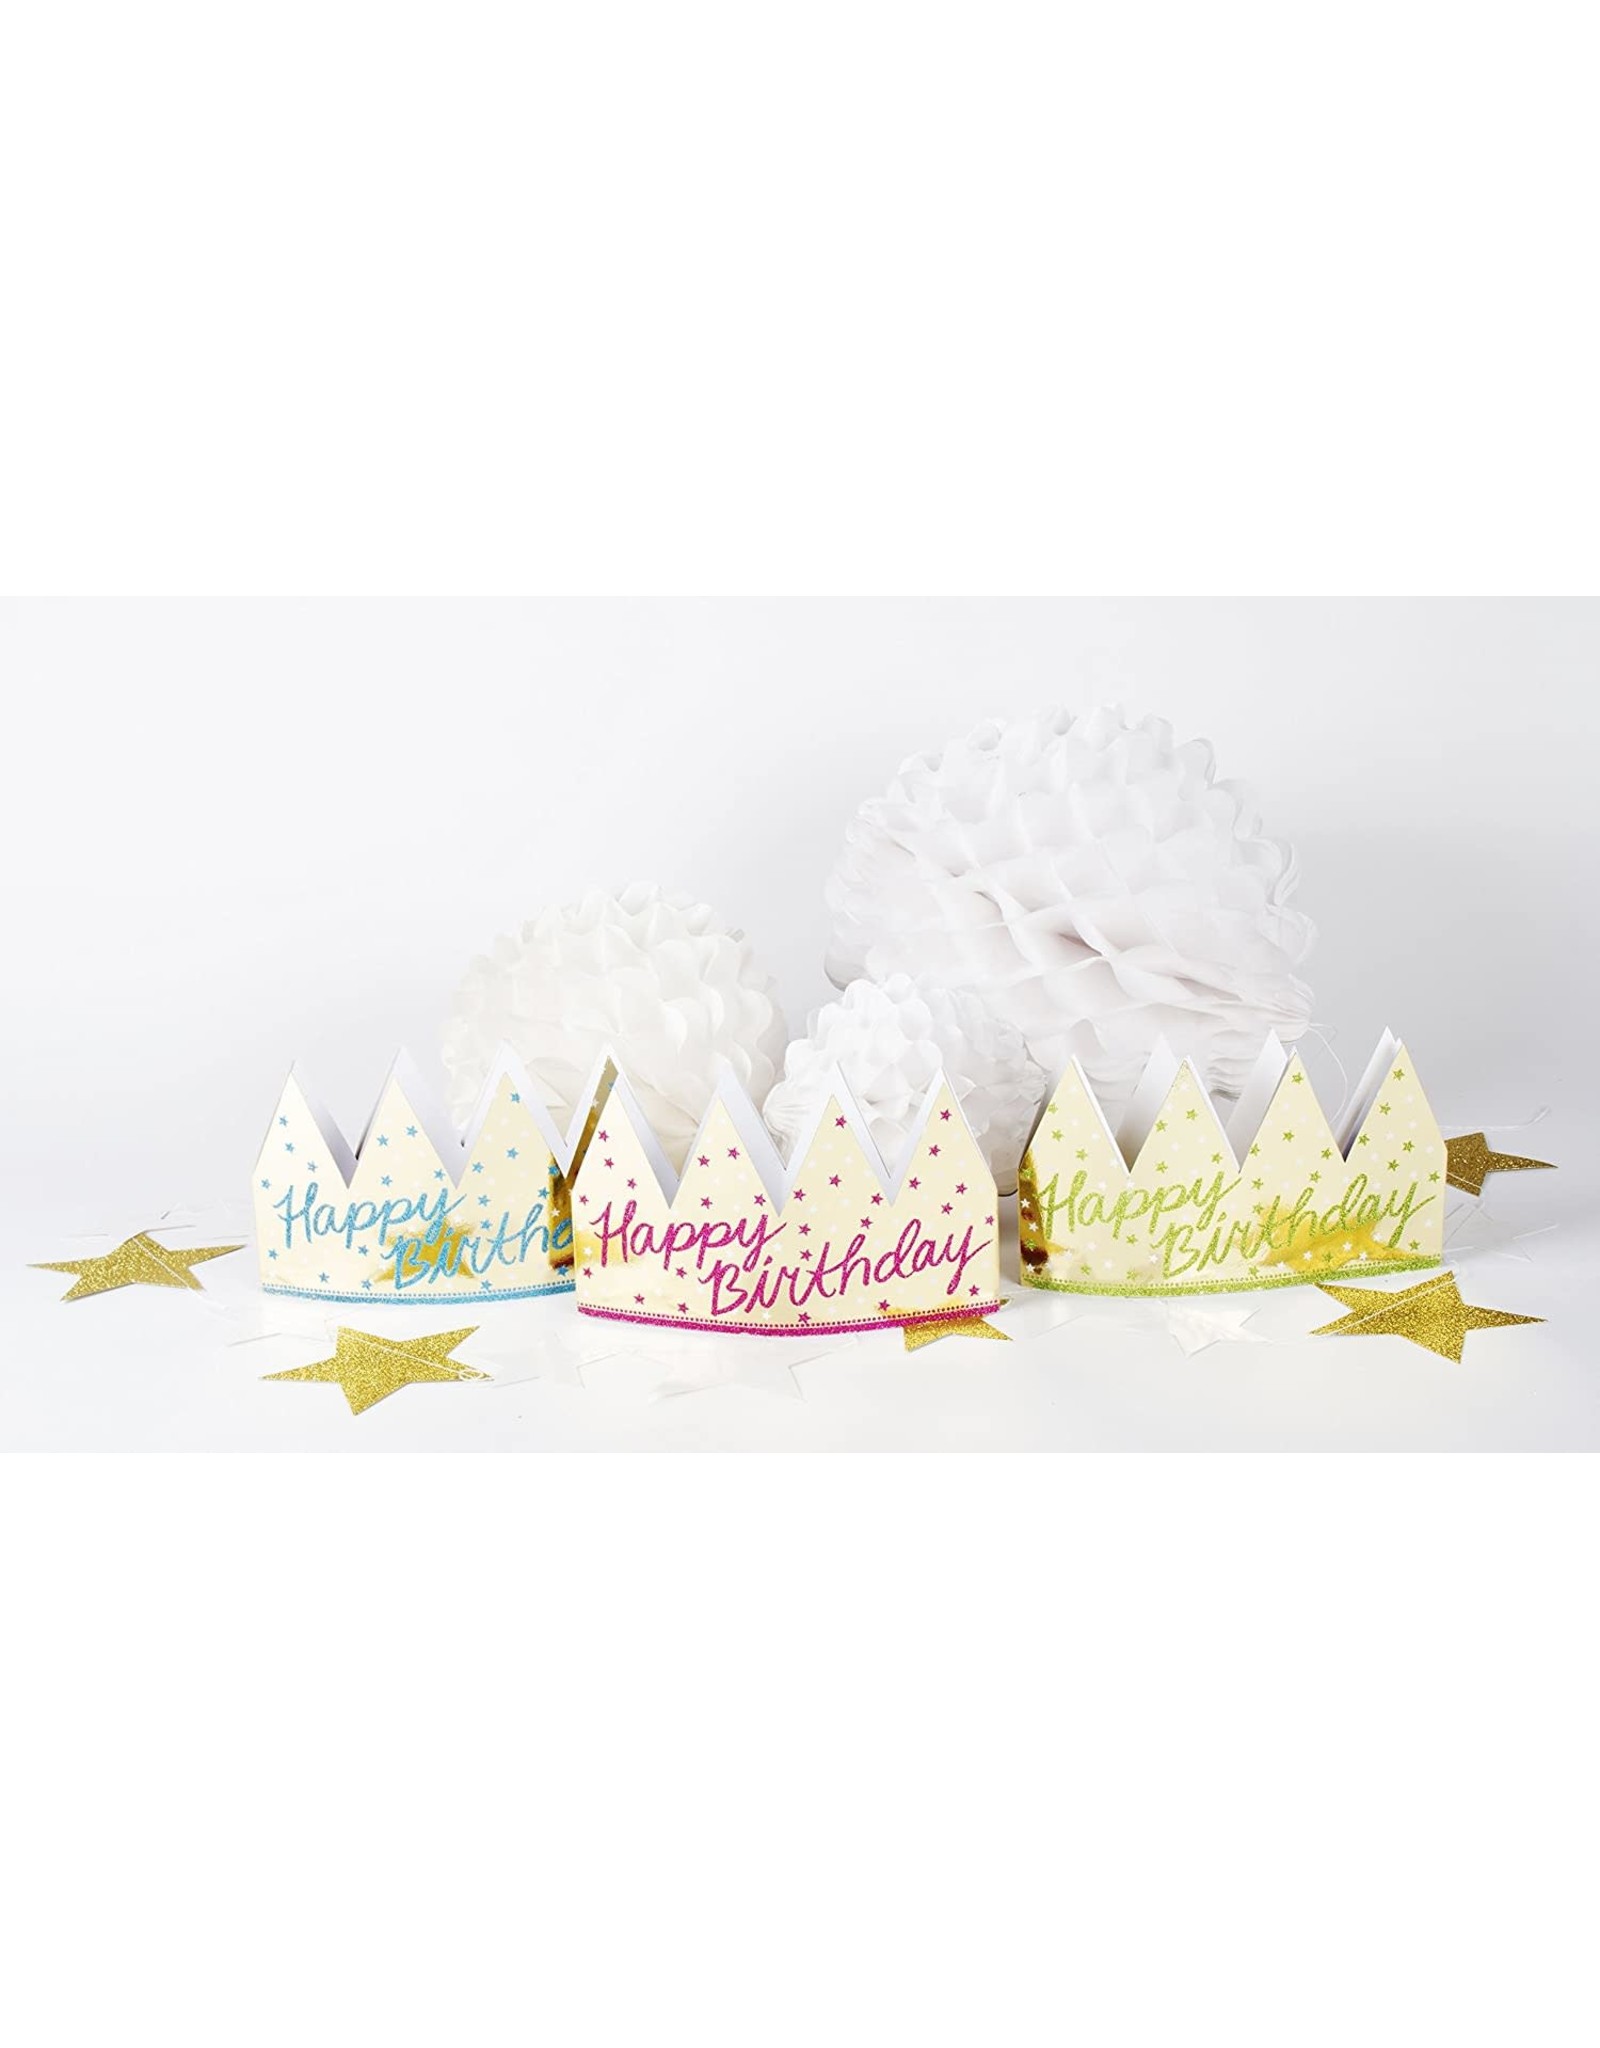 Gold Foil Glittered Happy Birthday Crowns 6pk